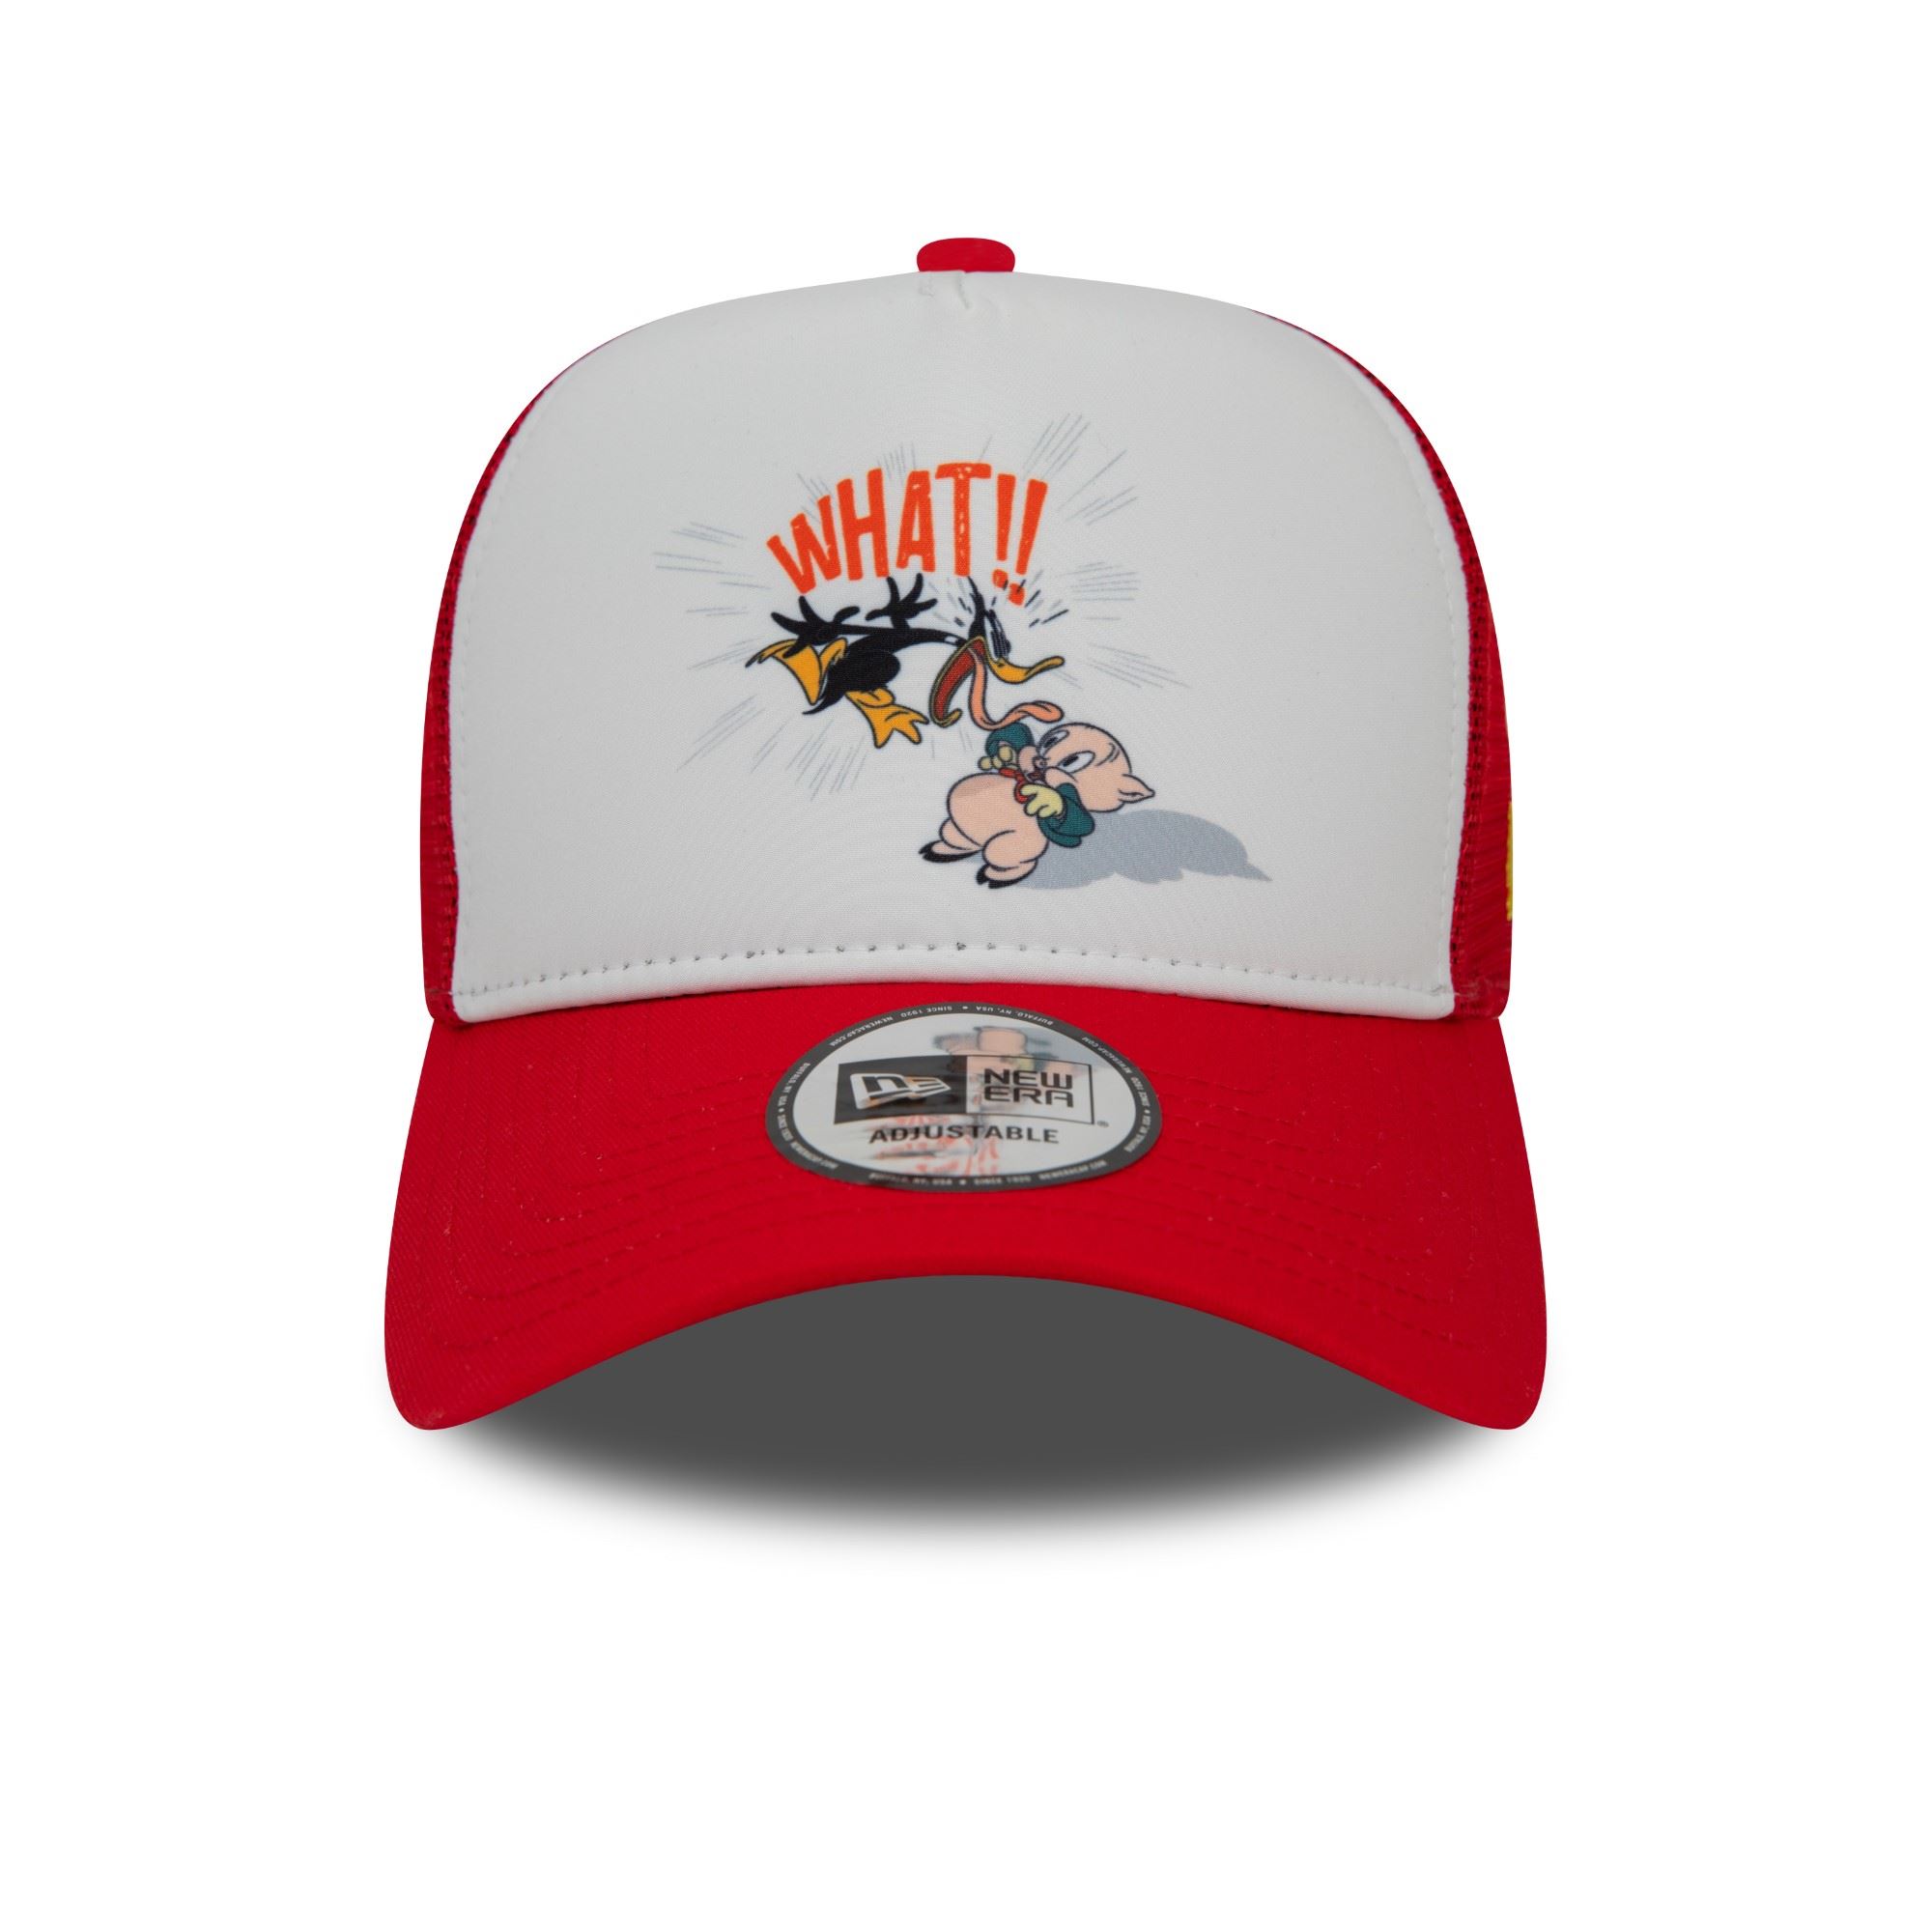 Daffy Duck and Porky Pig Looney Tunes Character Red White A-Frame Adjustable Trucker Cap New Era